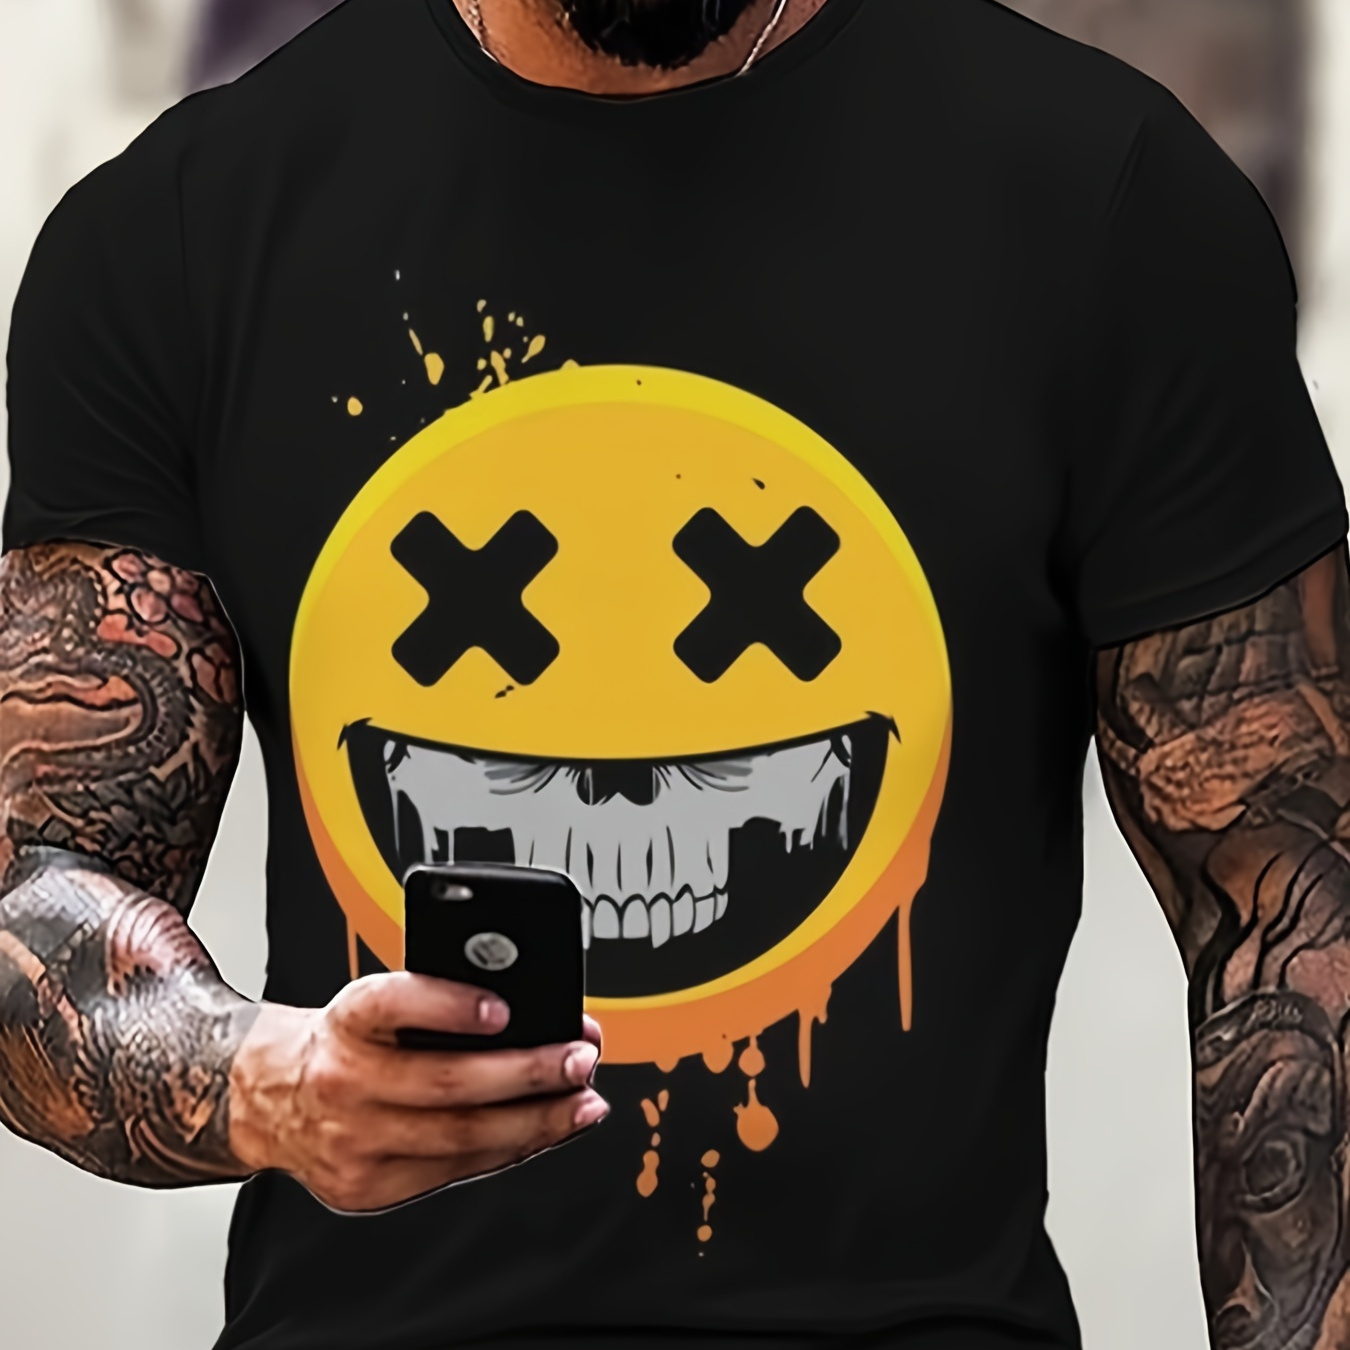 

Cartoon Smiling Face With Hiding Skull 3d Digital Pattern Print Graphic Men's T-shirts, Causal Tees, Short Sleeves Comfortable Pullover Tops, Men's Summer Clothing